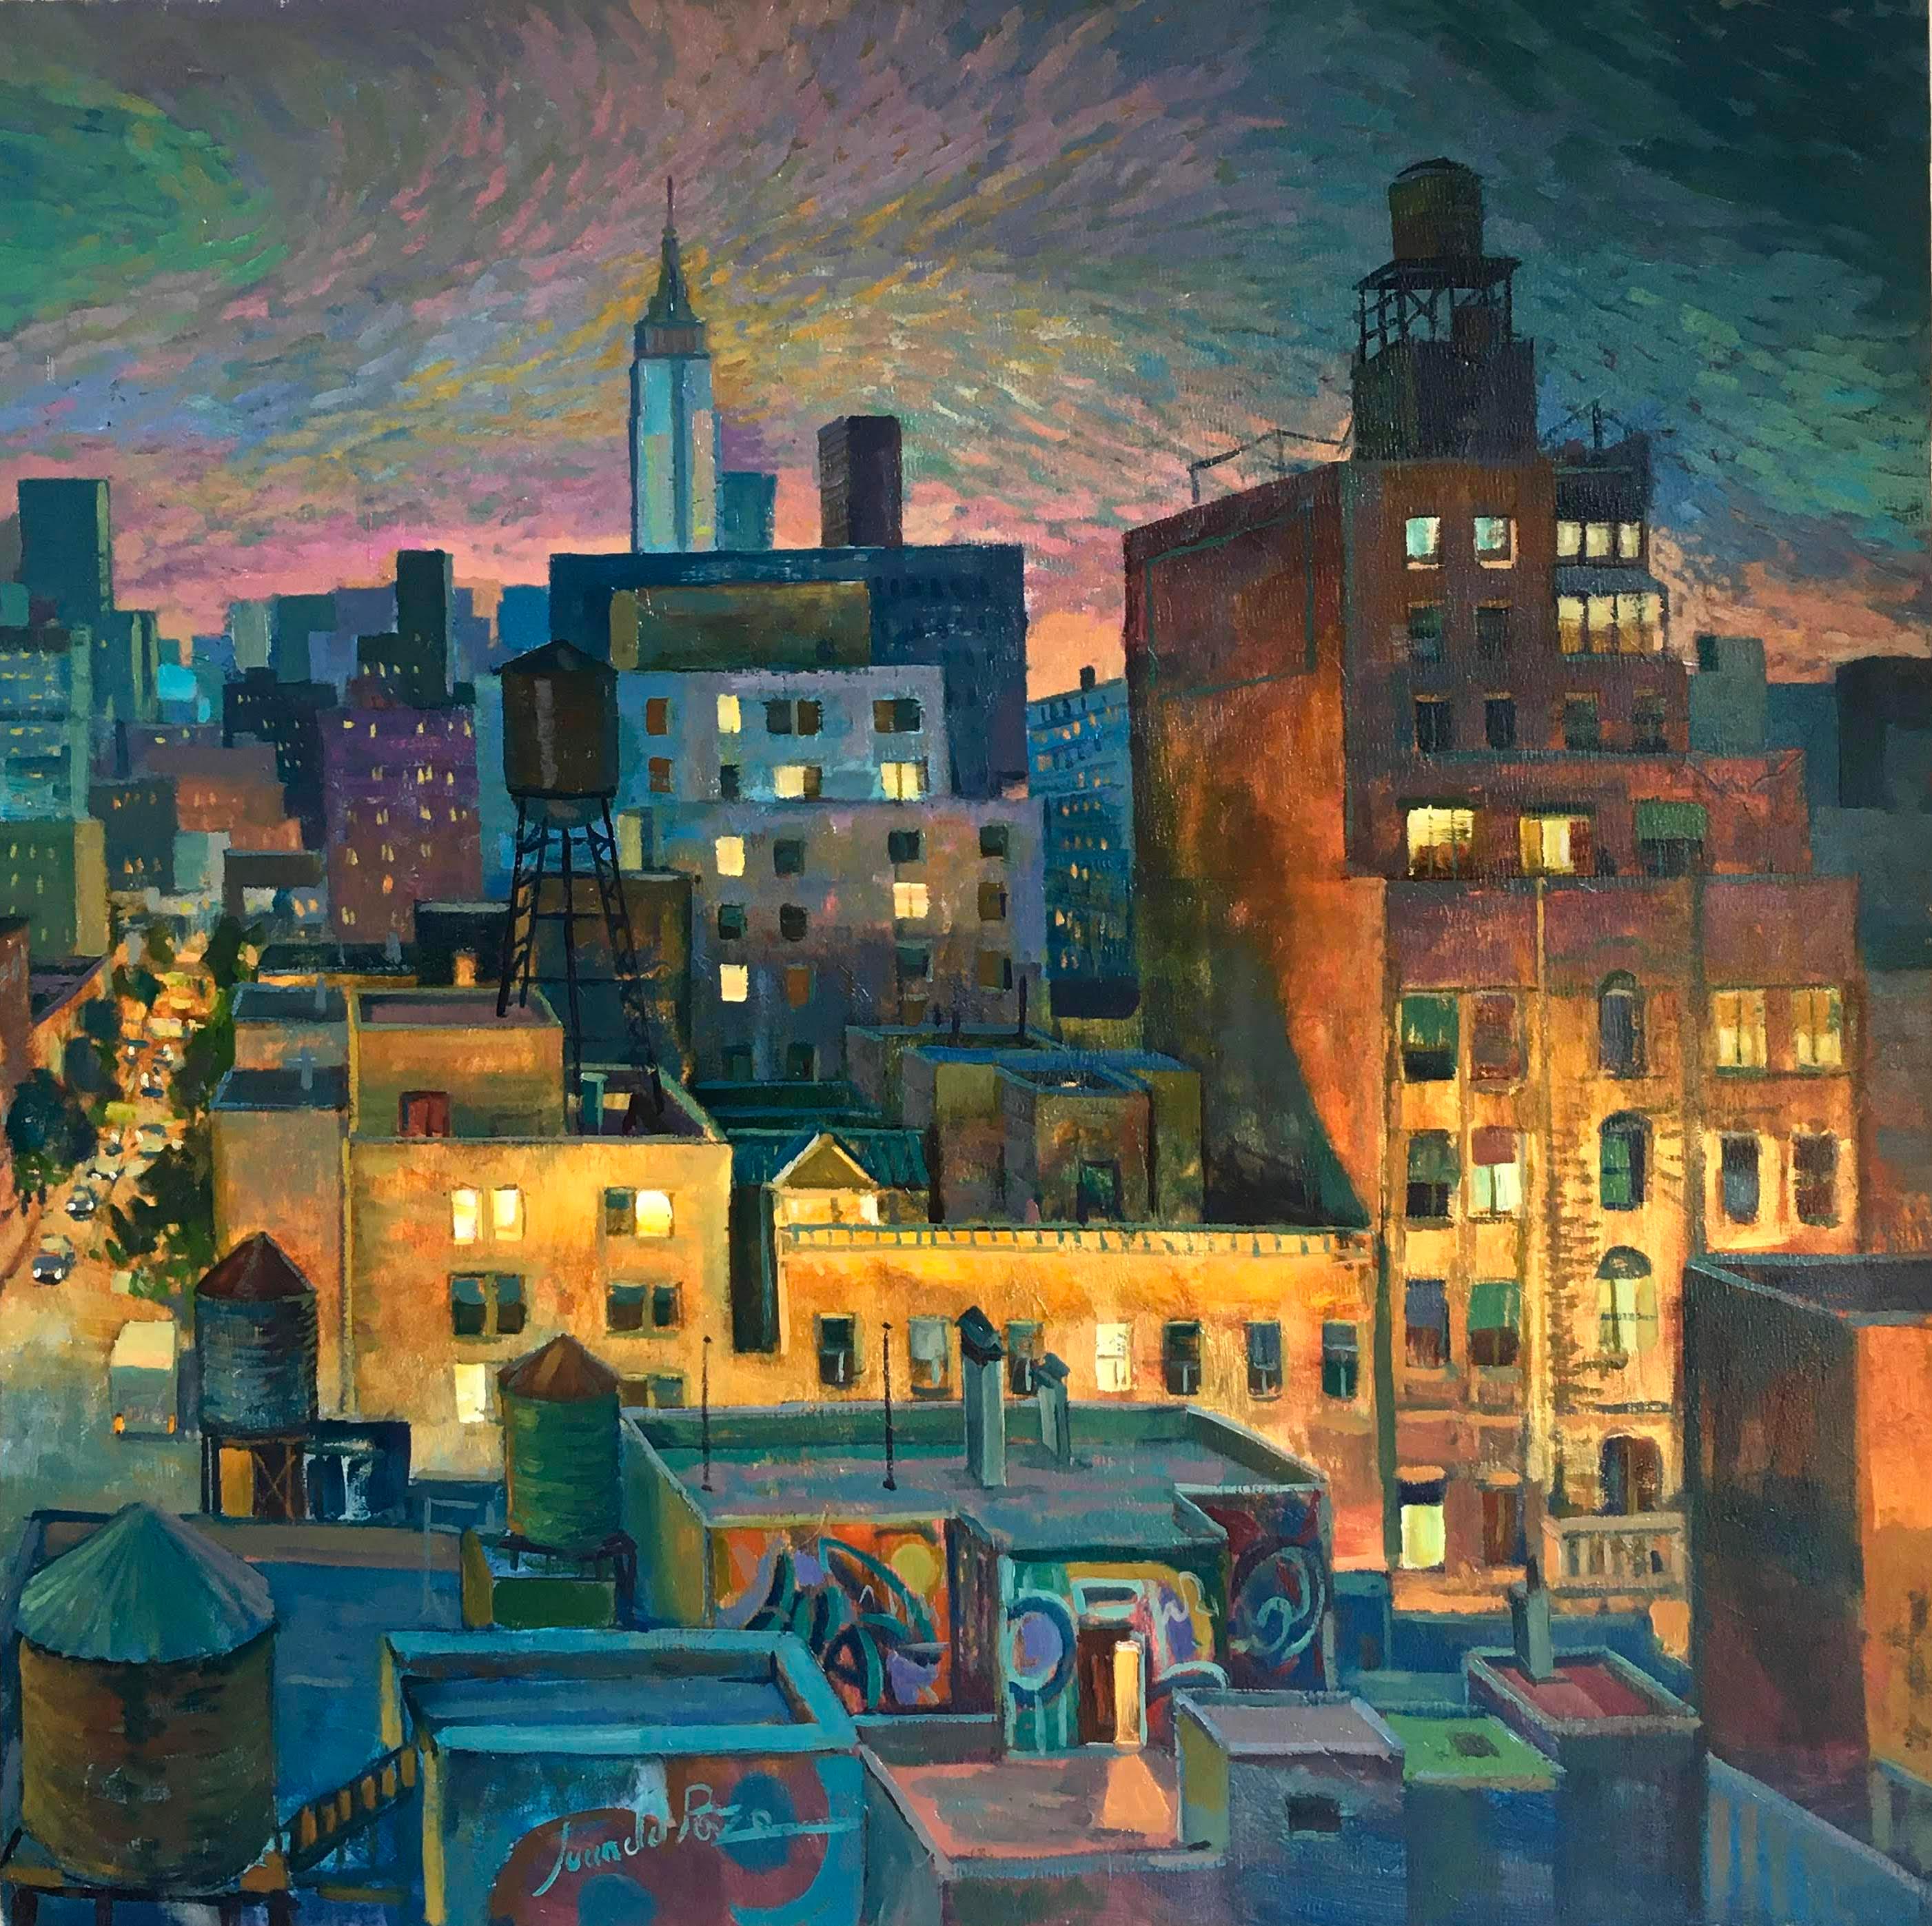 Rooftop Nights - New York original city landscape painting Contemporary Art 21st - Post-Impressionist Painting by Juan del Pozo